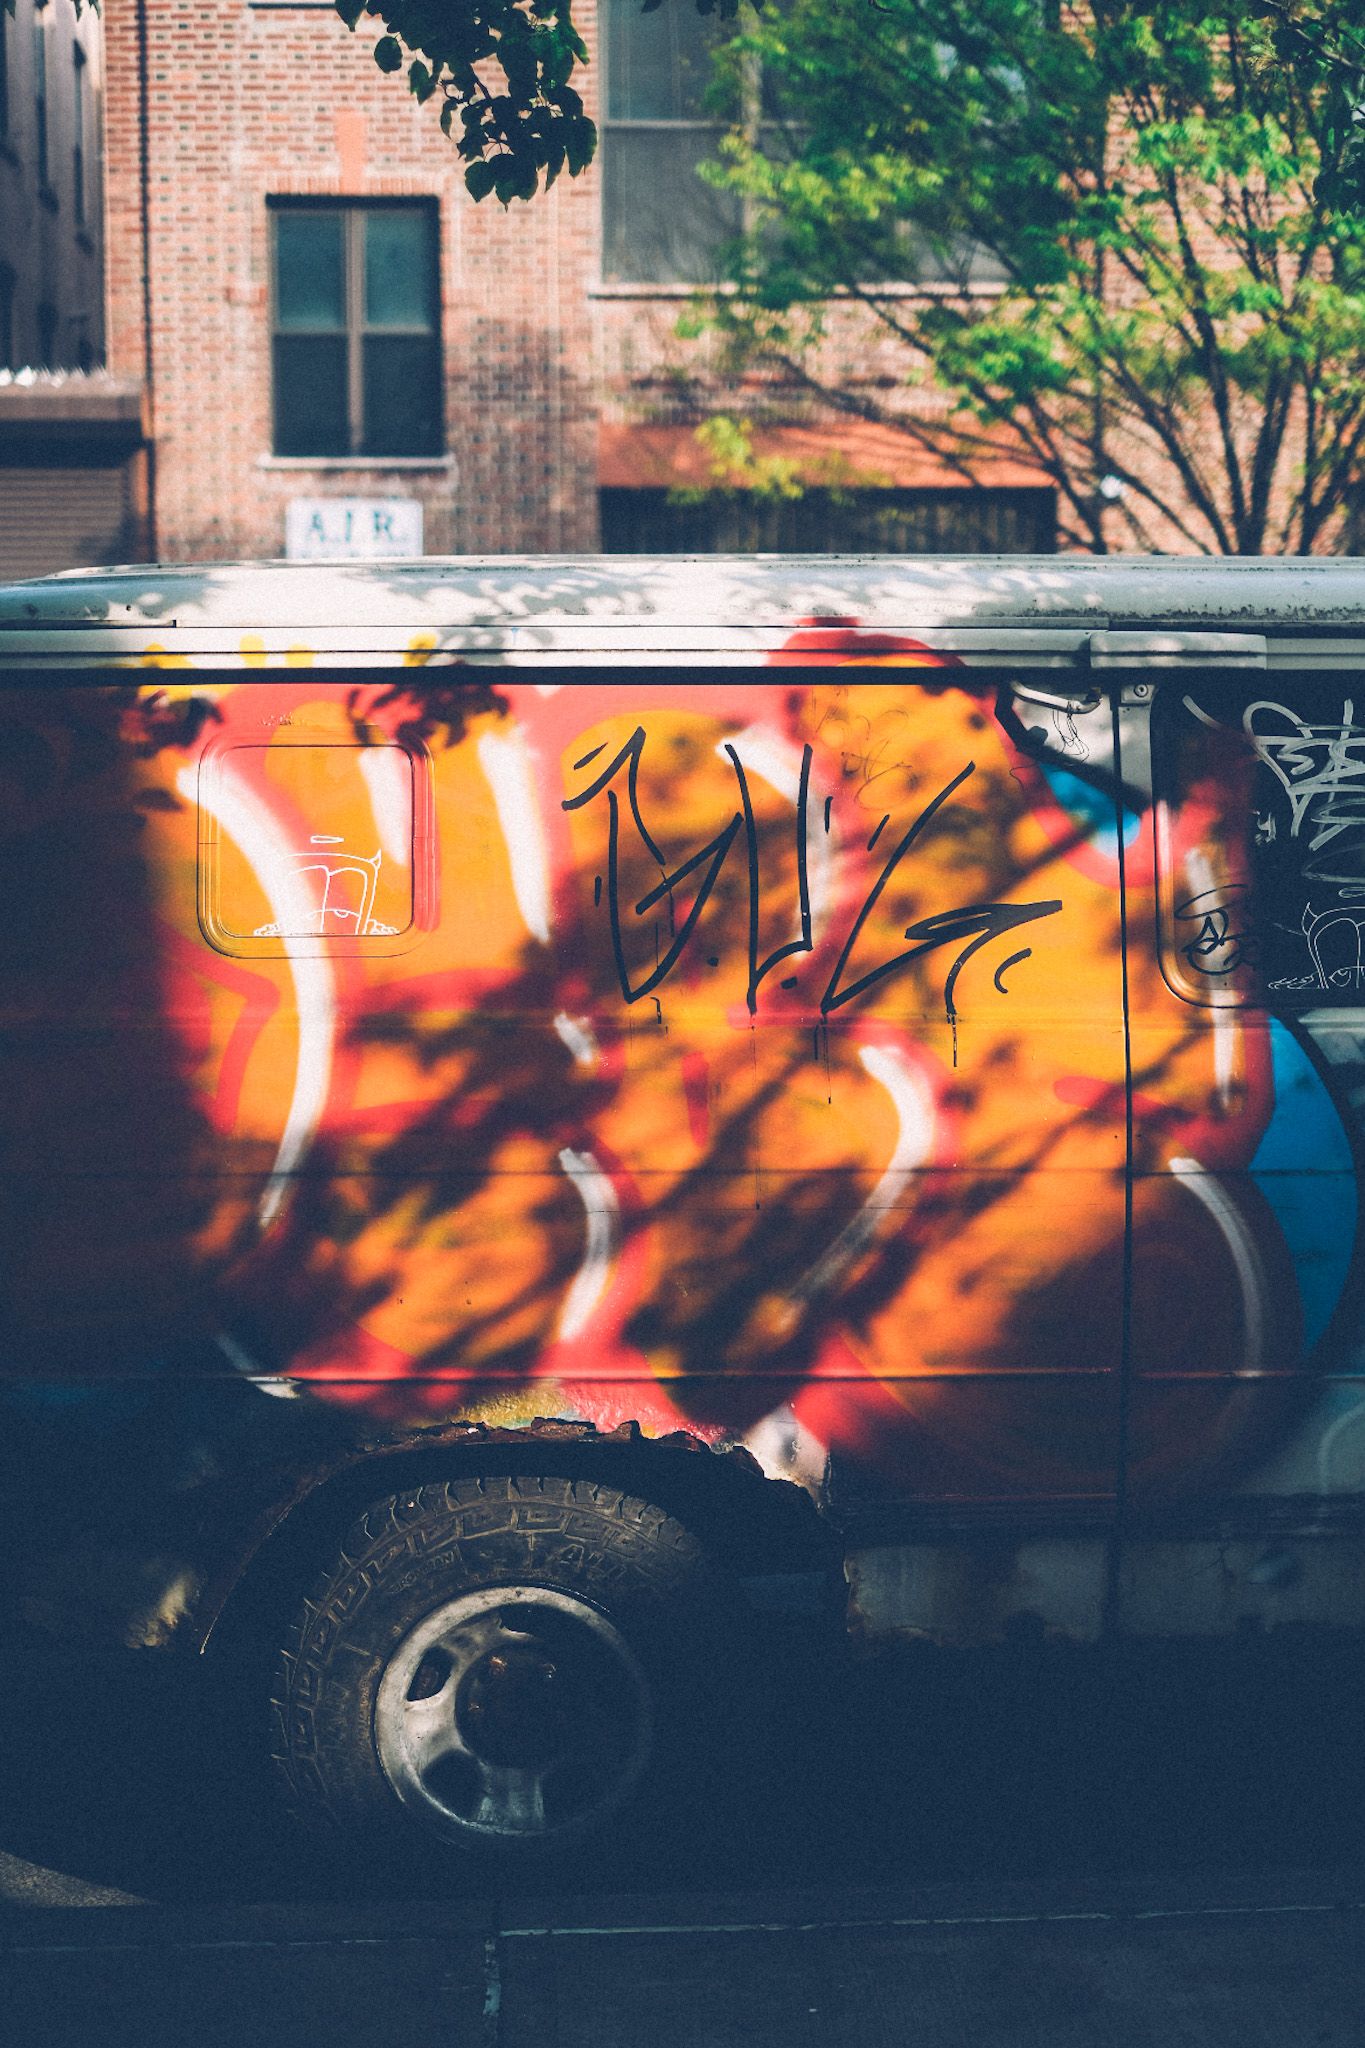 In the afternoon light, tree branch shadows fall over a van painted orange with pink and white graffiti.